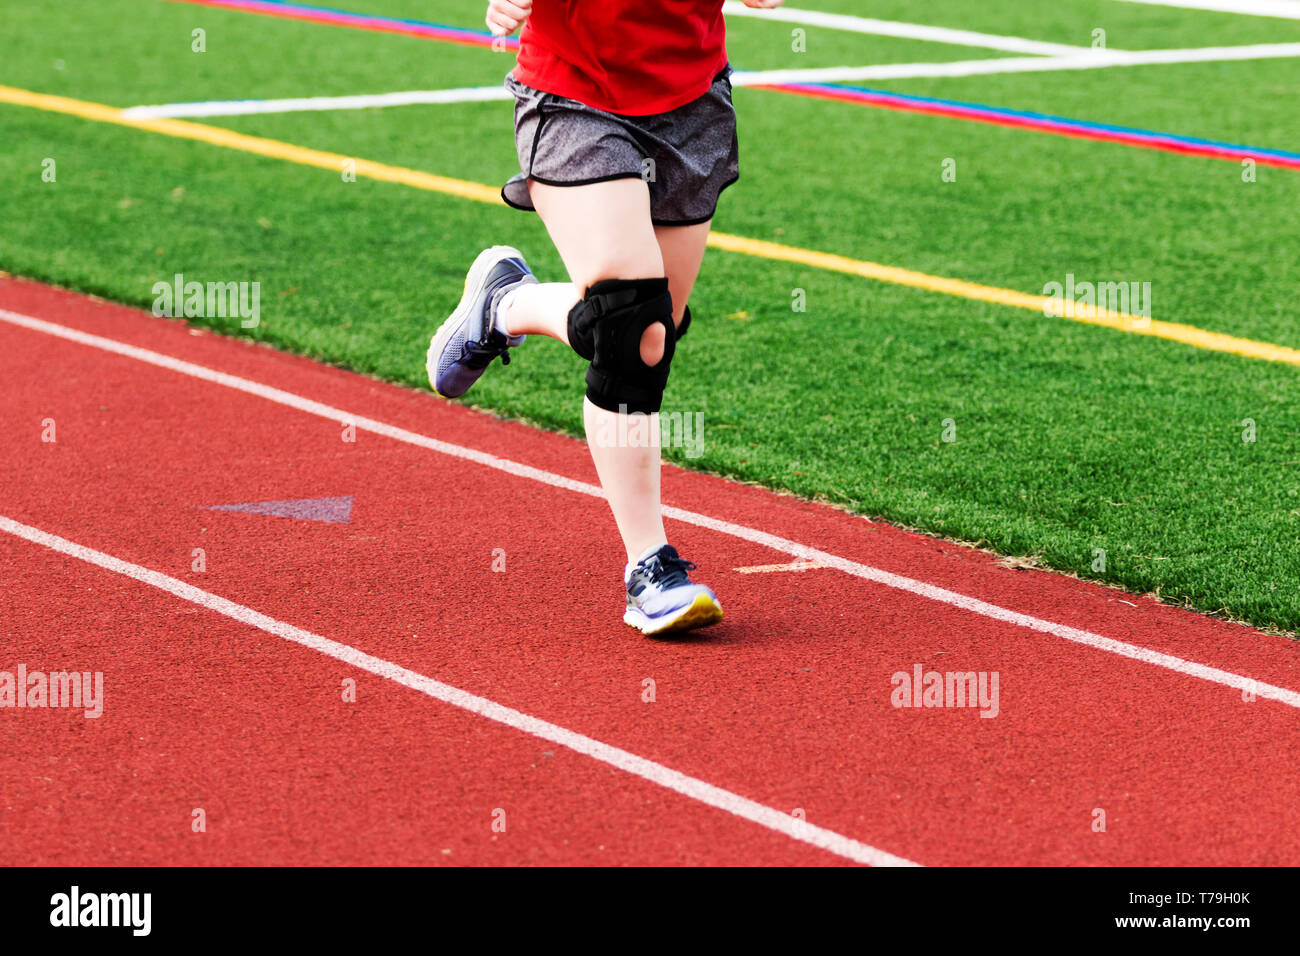 A runner is practicing on a red track while wearing a large black knee brace. Stock Photo